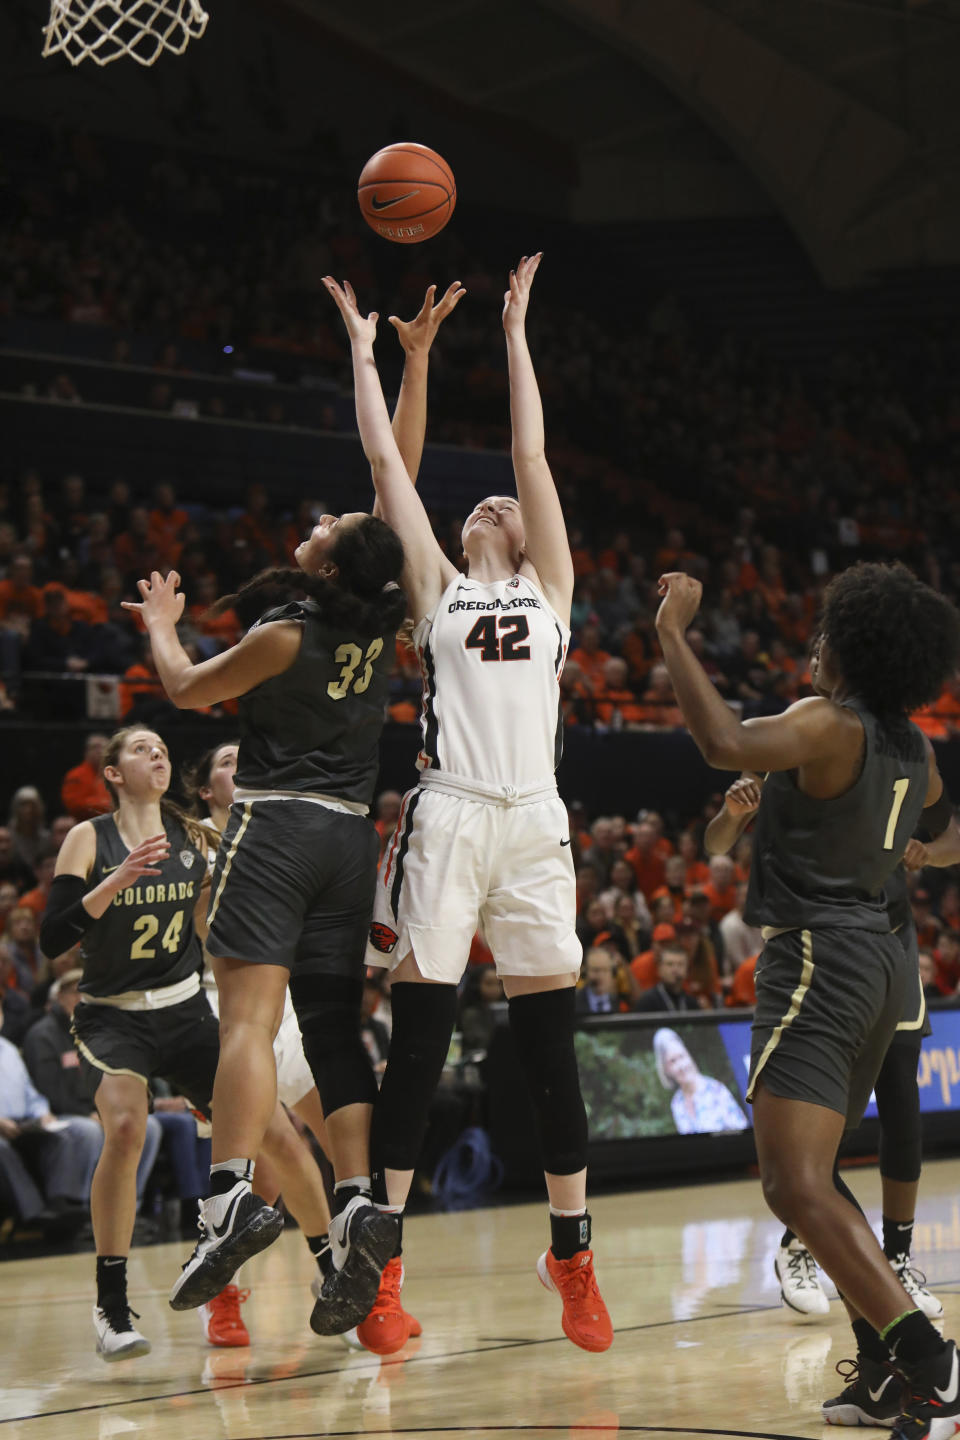 Oregon State's Kennedy Brown (42) and Colorado's Peanut Tuitele (33) fight for possession of a rebound during the first half of an NCAA college basketball game in Corvallis, Ore., Sunday, Jan. 5, 2020. (AP Photo/Amanda Loman)